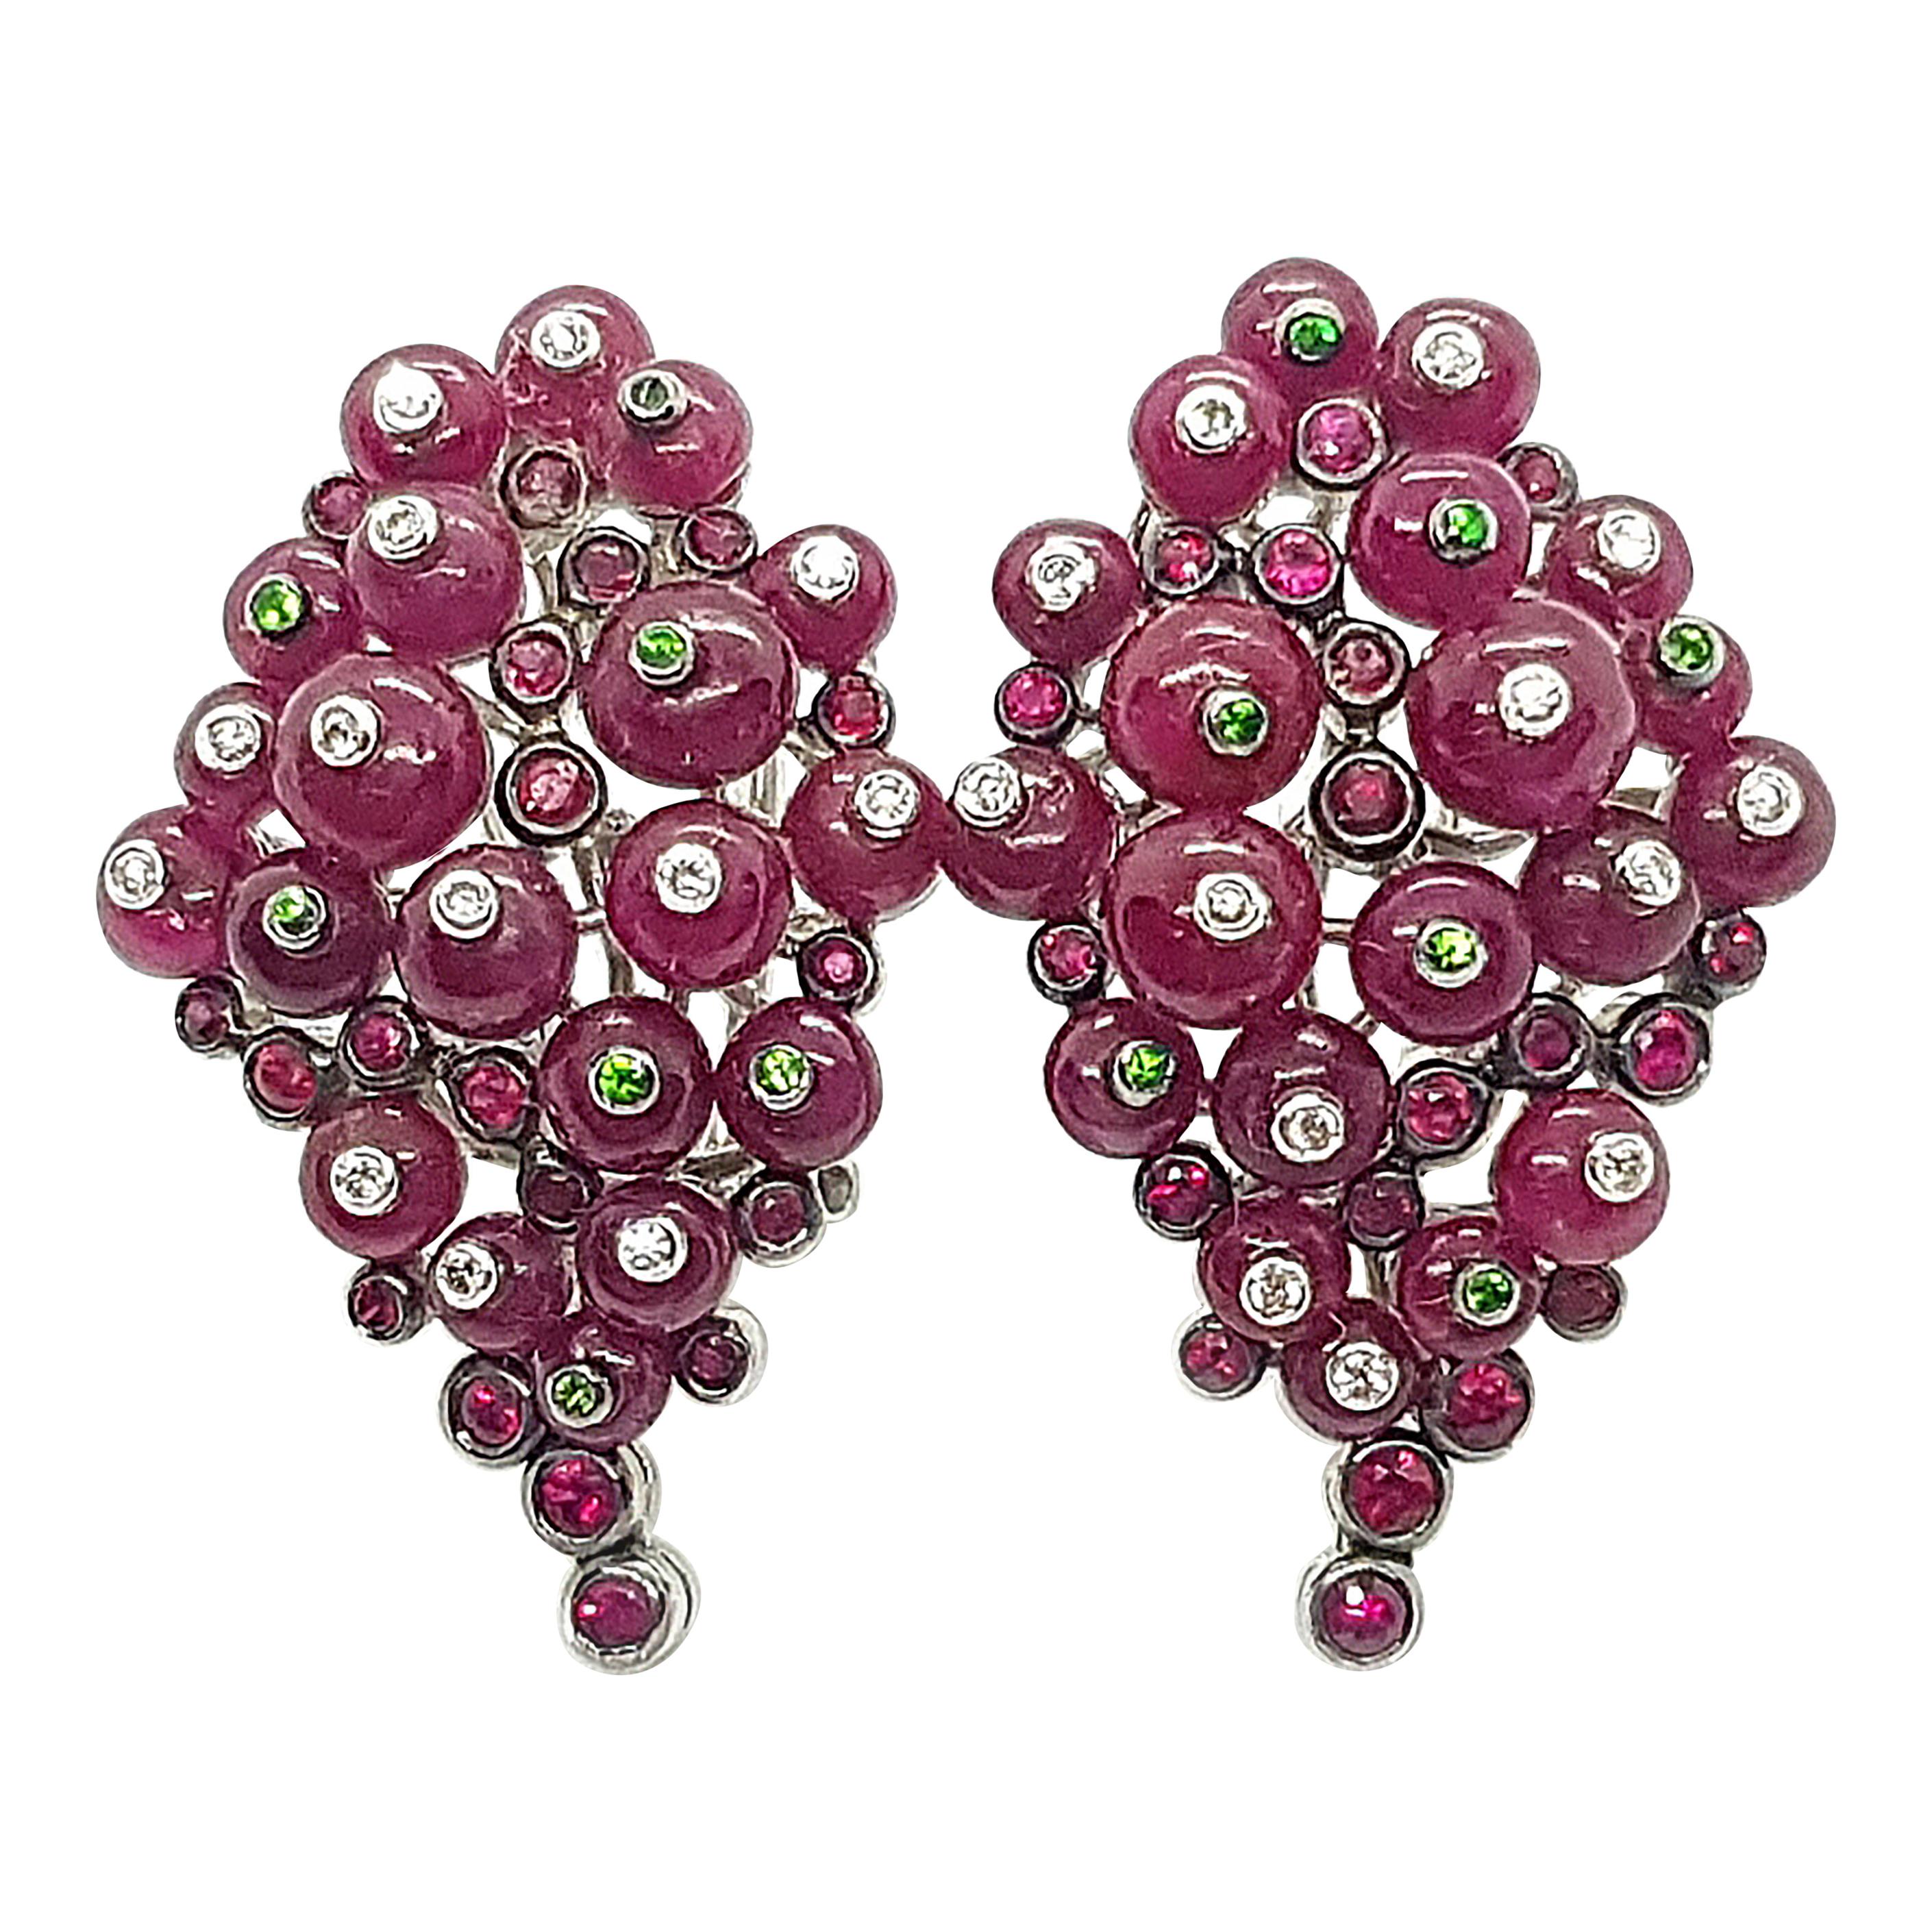 Cabochon Ruby with Tsavorite, Ruby and Diamond Earrings in 18 Karat White Gold